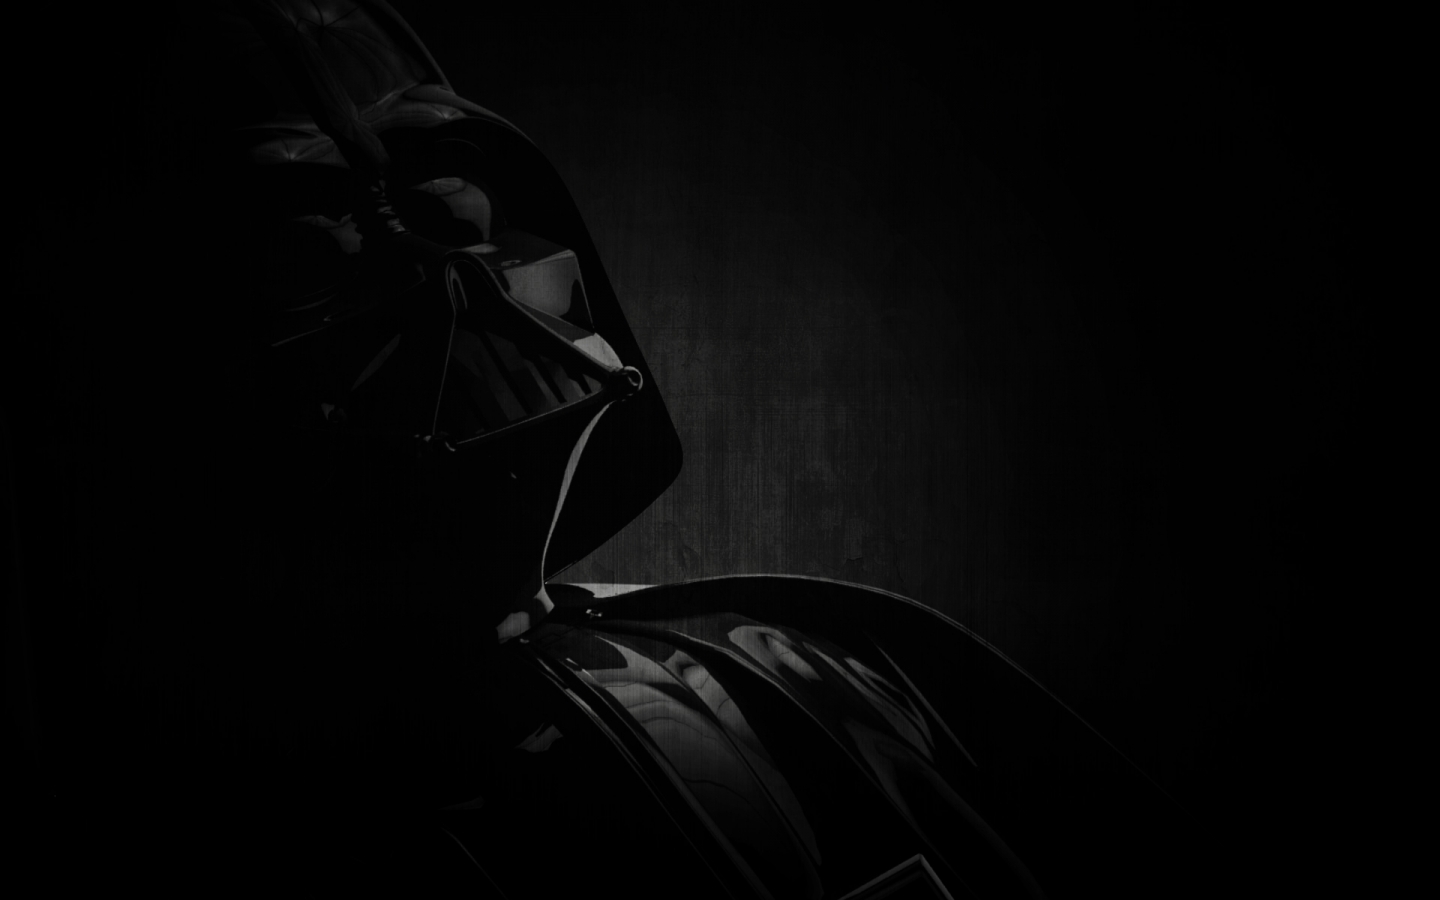 Darth Vader Character, for 1440 x 900 widescreen resolution